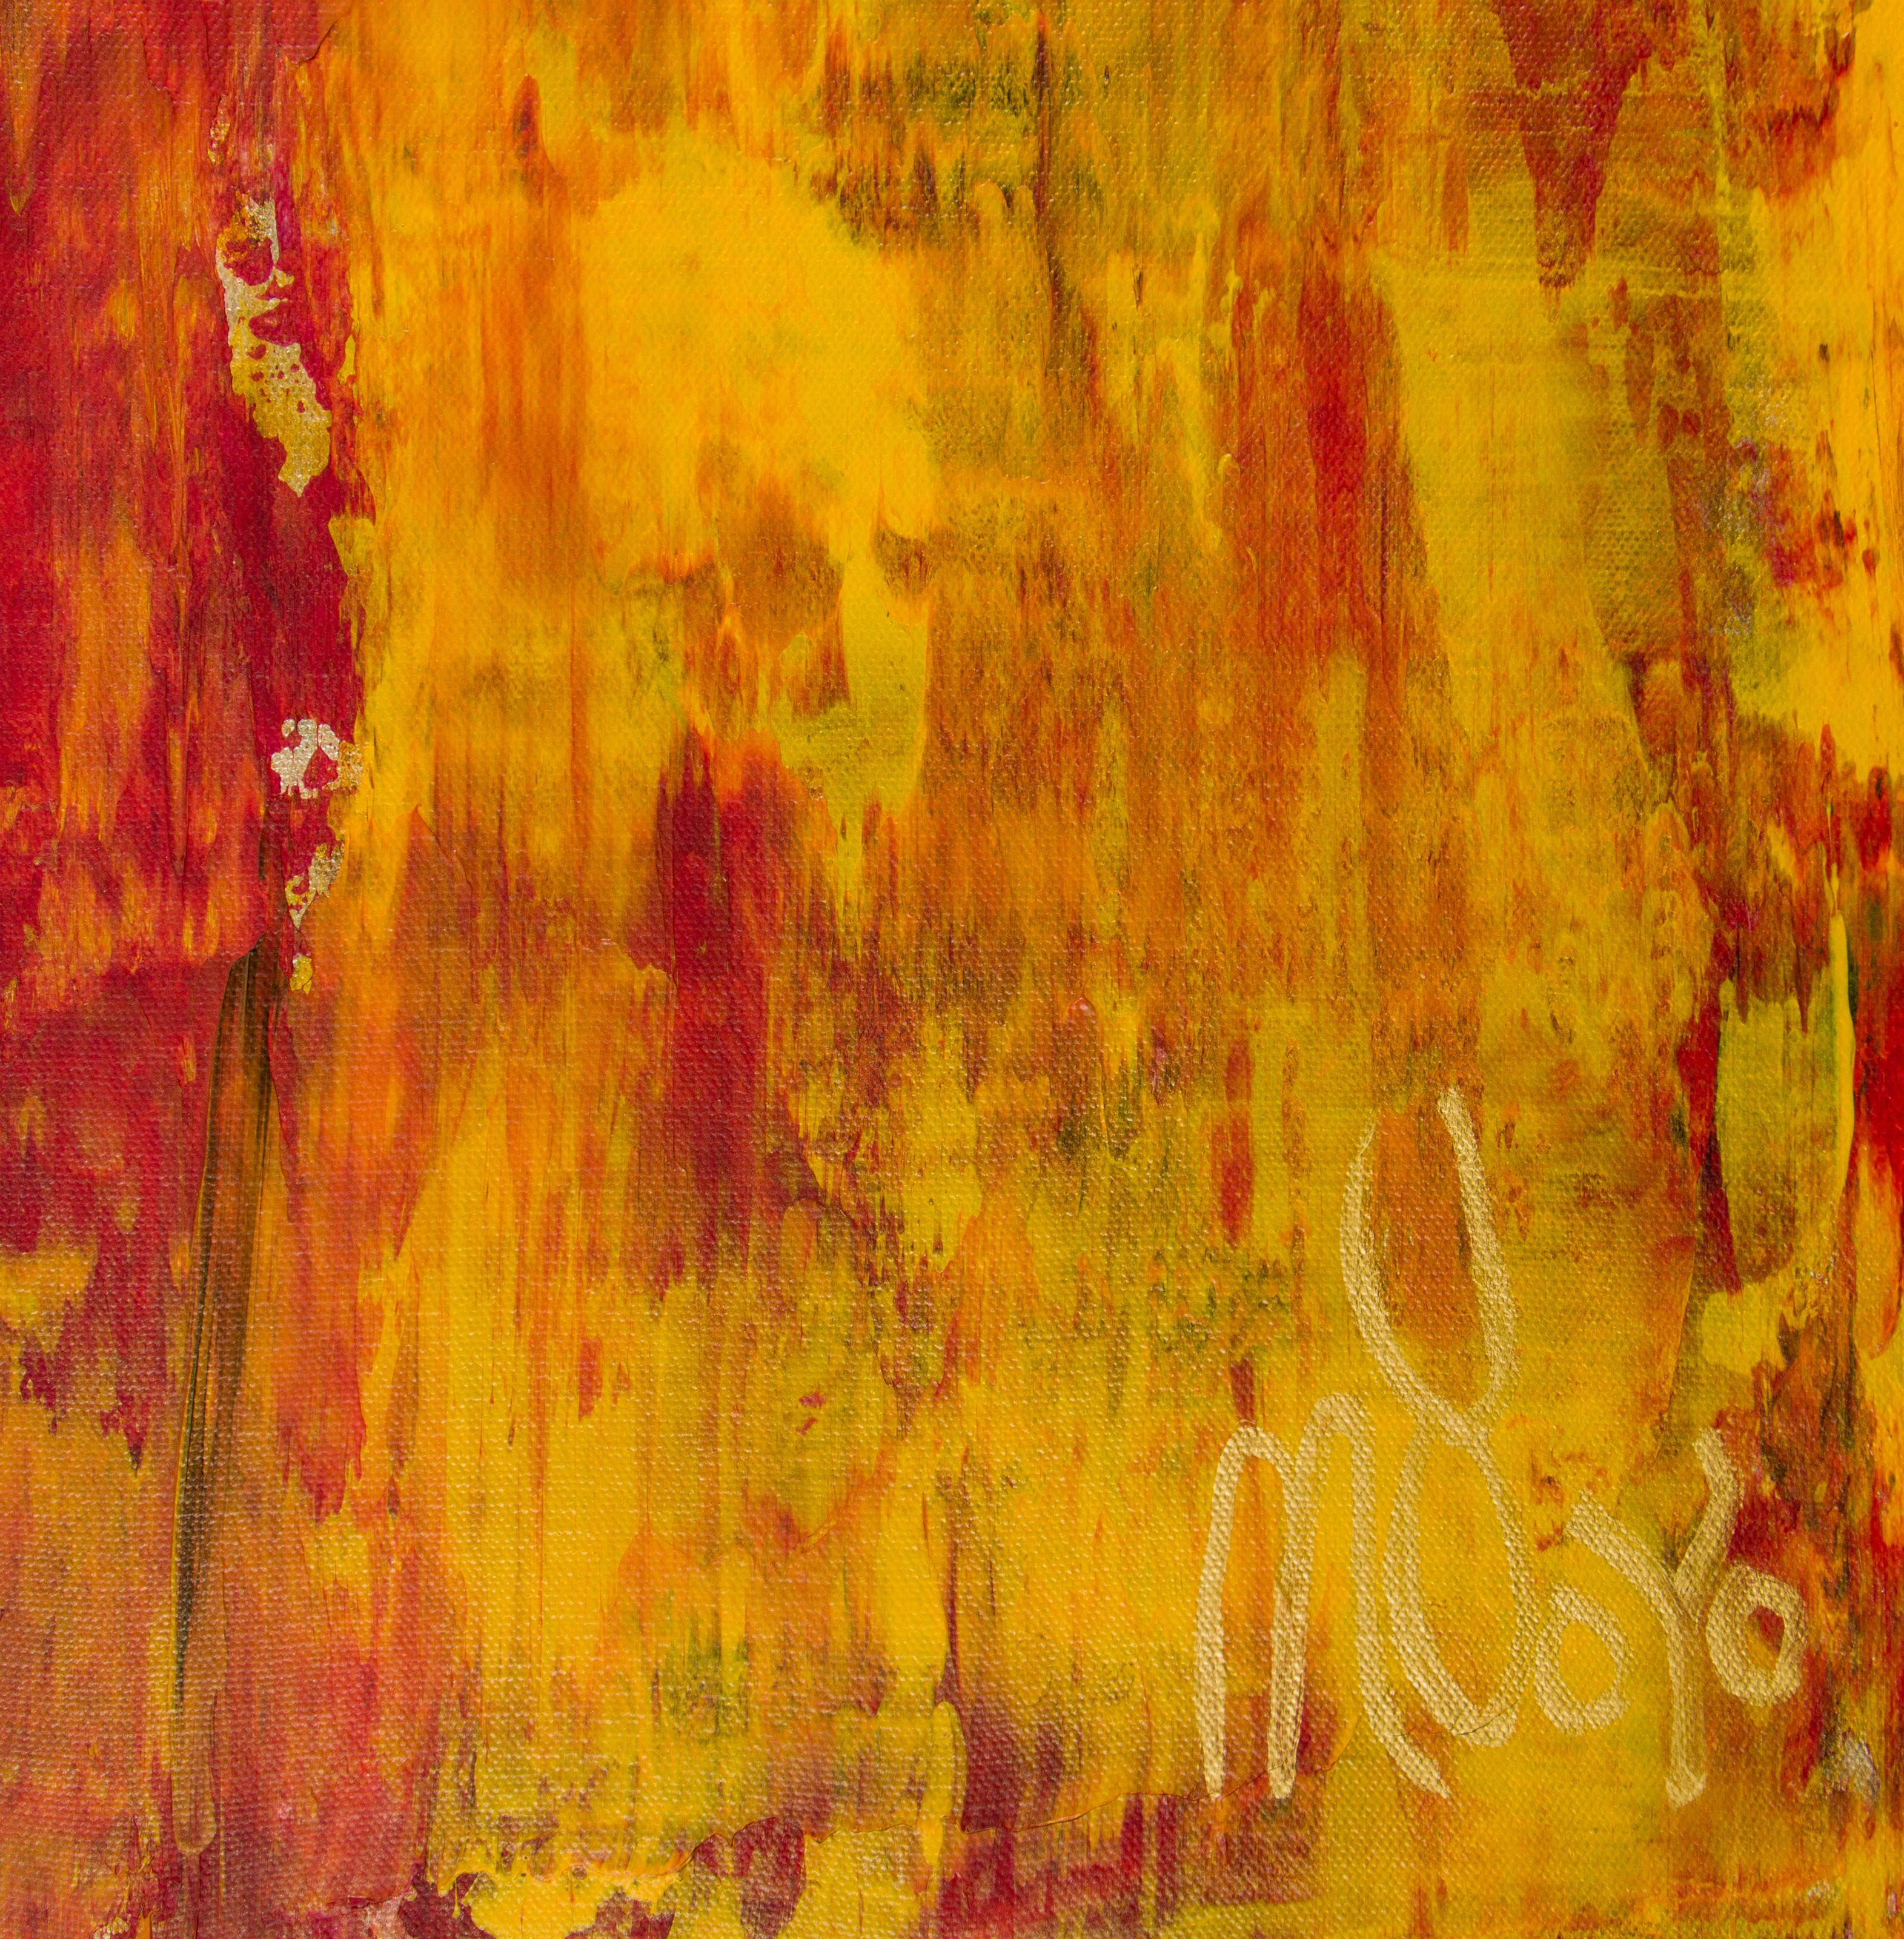 Painting: Acrylic on Canvas.    abstract minimalist painting  acrylic on canvas    This artwork was created layering and blending thin layers of orange, yellow, some red and magenta with iridescent mica particles with the idea of bringing the most